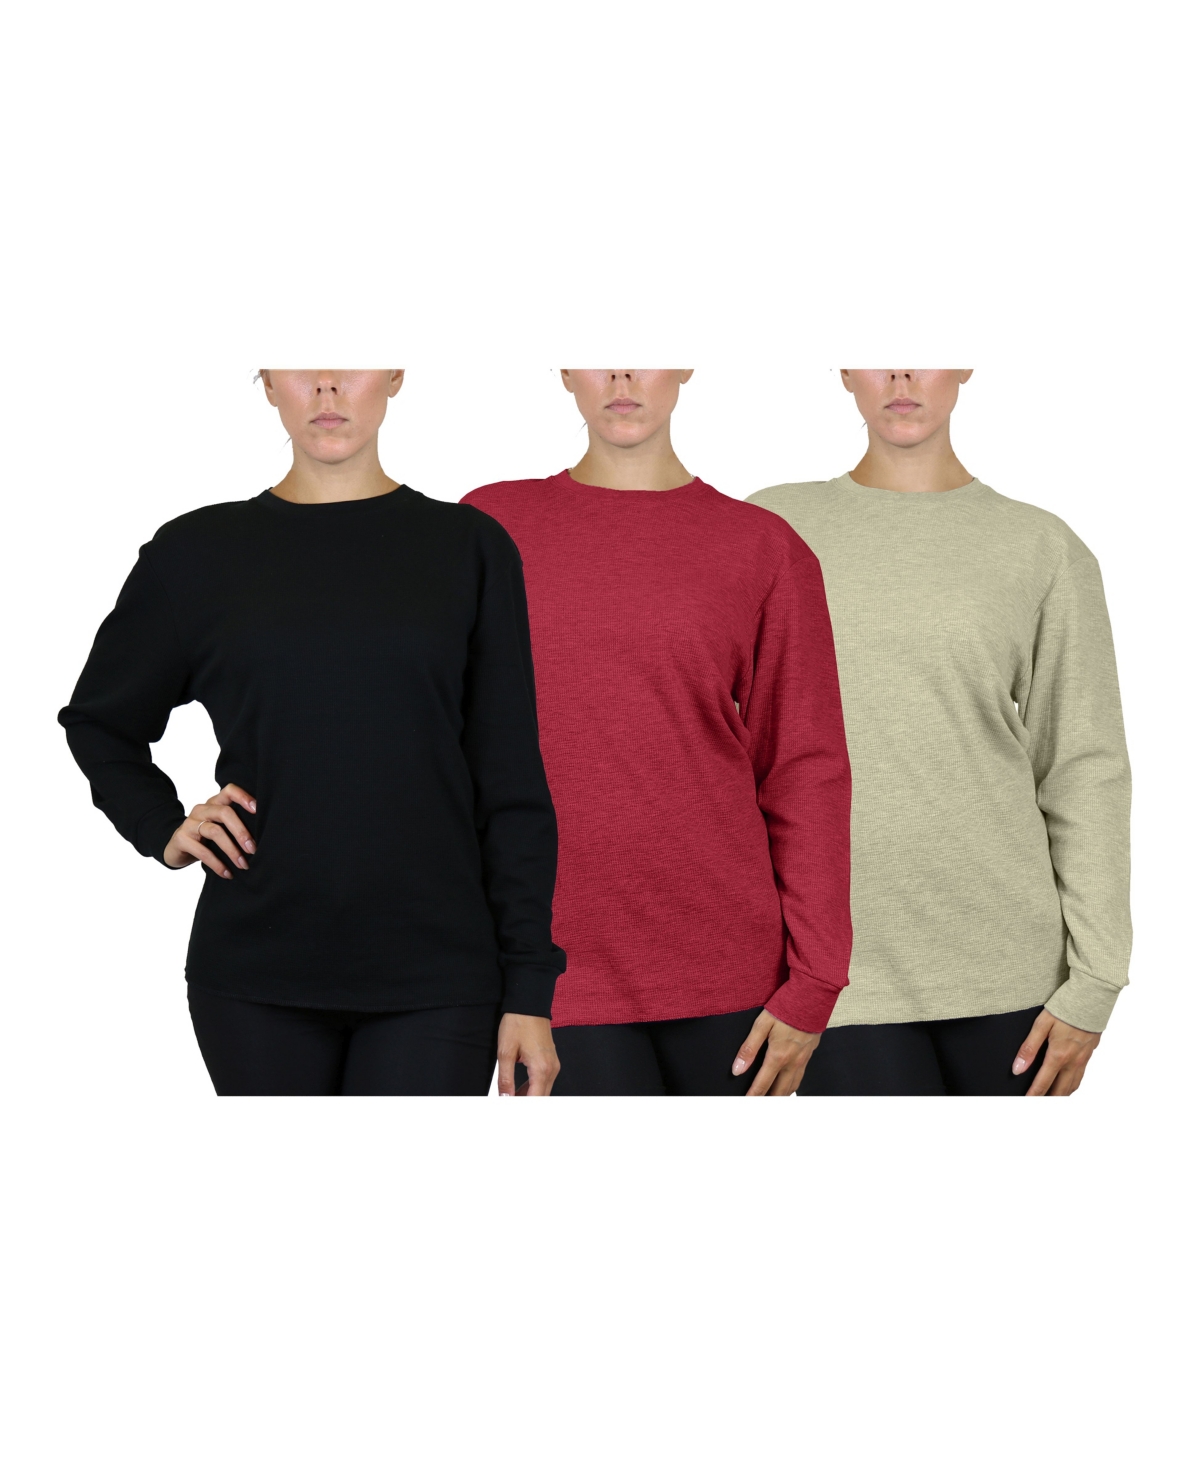 Shop Galaxy By Harvic Women's Loose Fit Waffle Knit Thermal Shirt, Pack Of 3 In Black,burgundy,heather Oatmeal